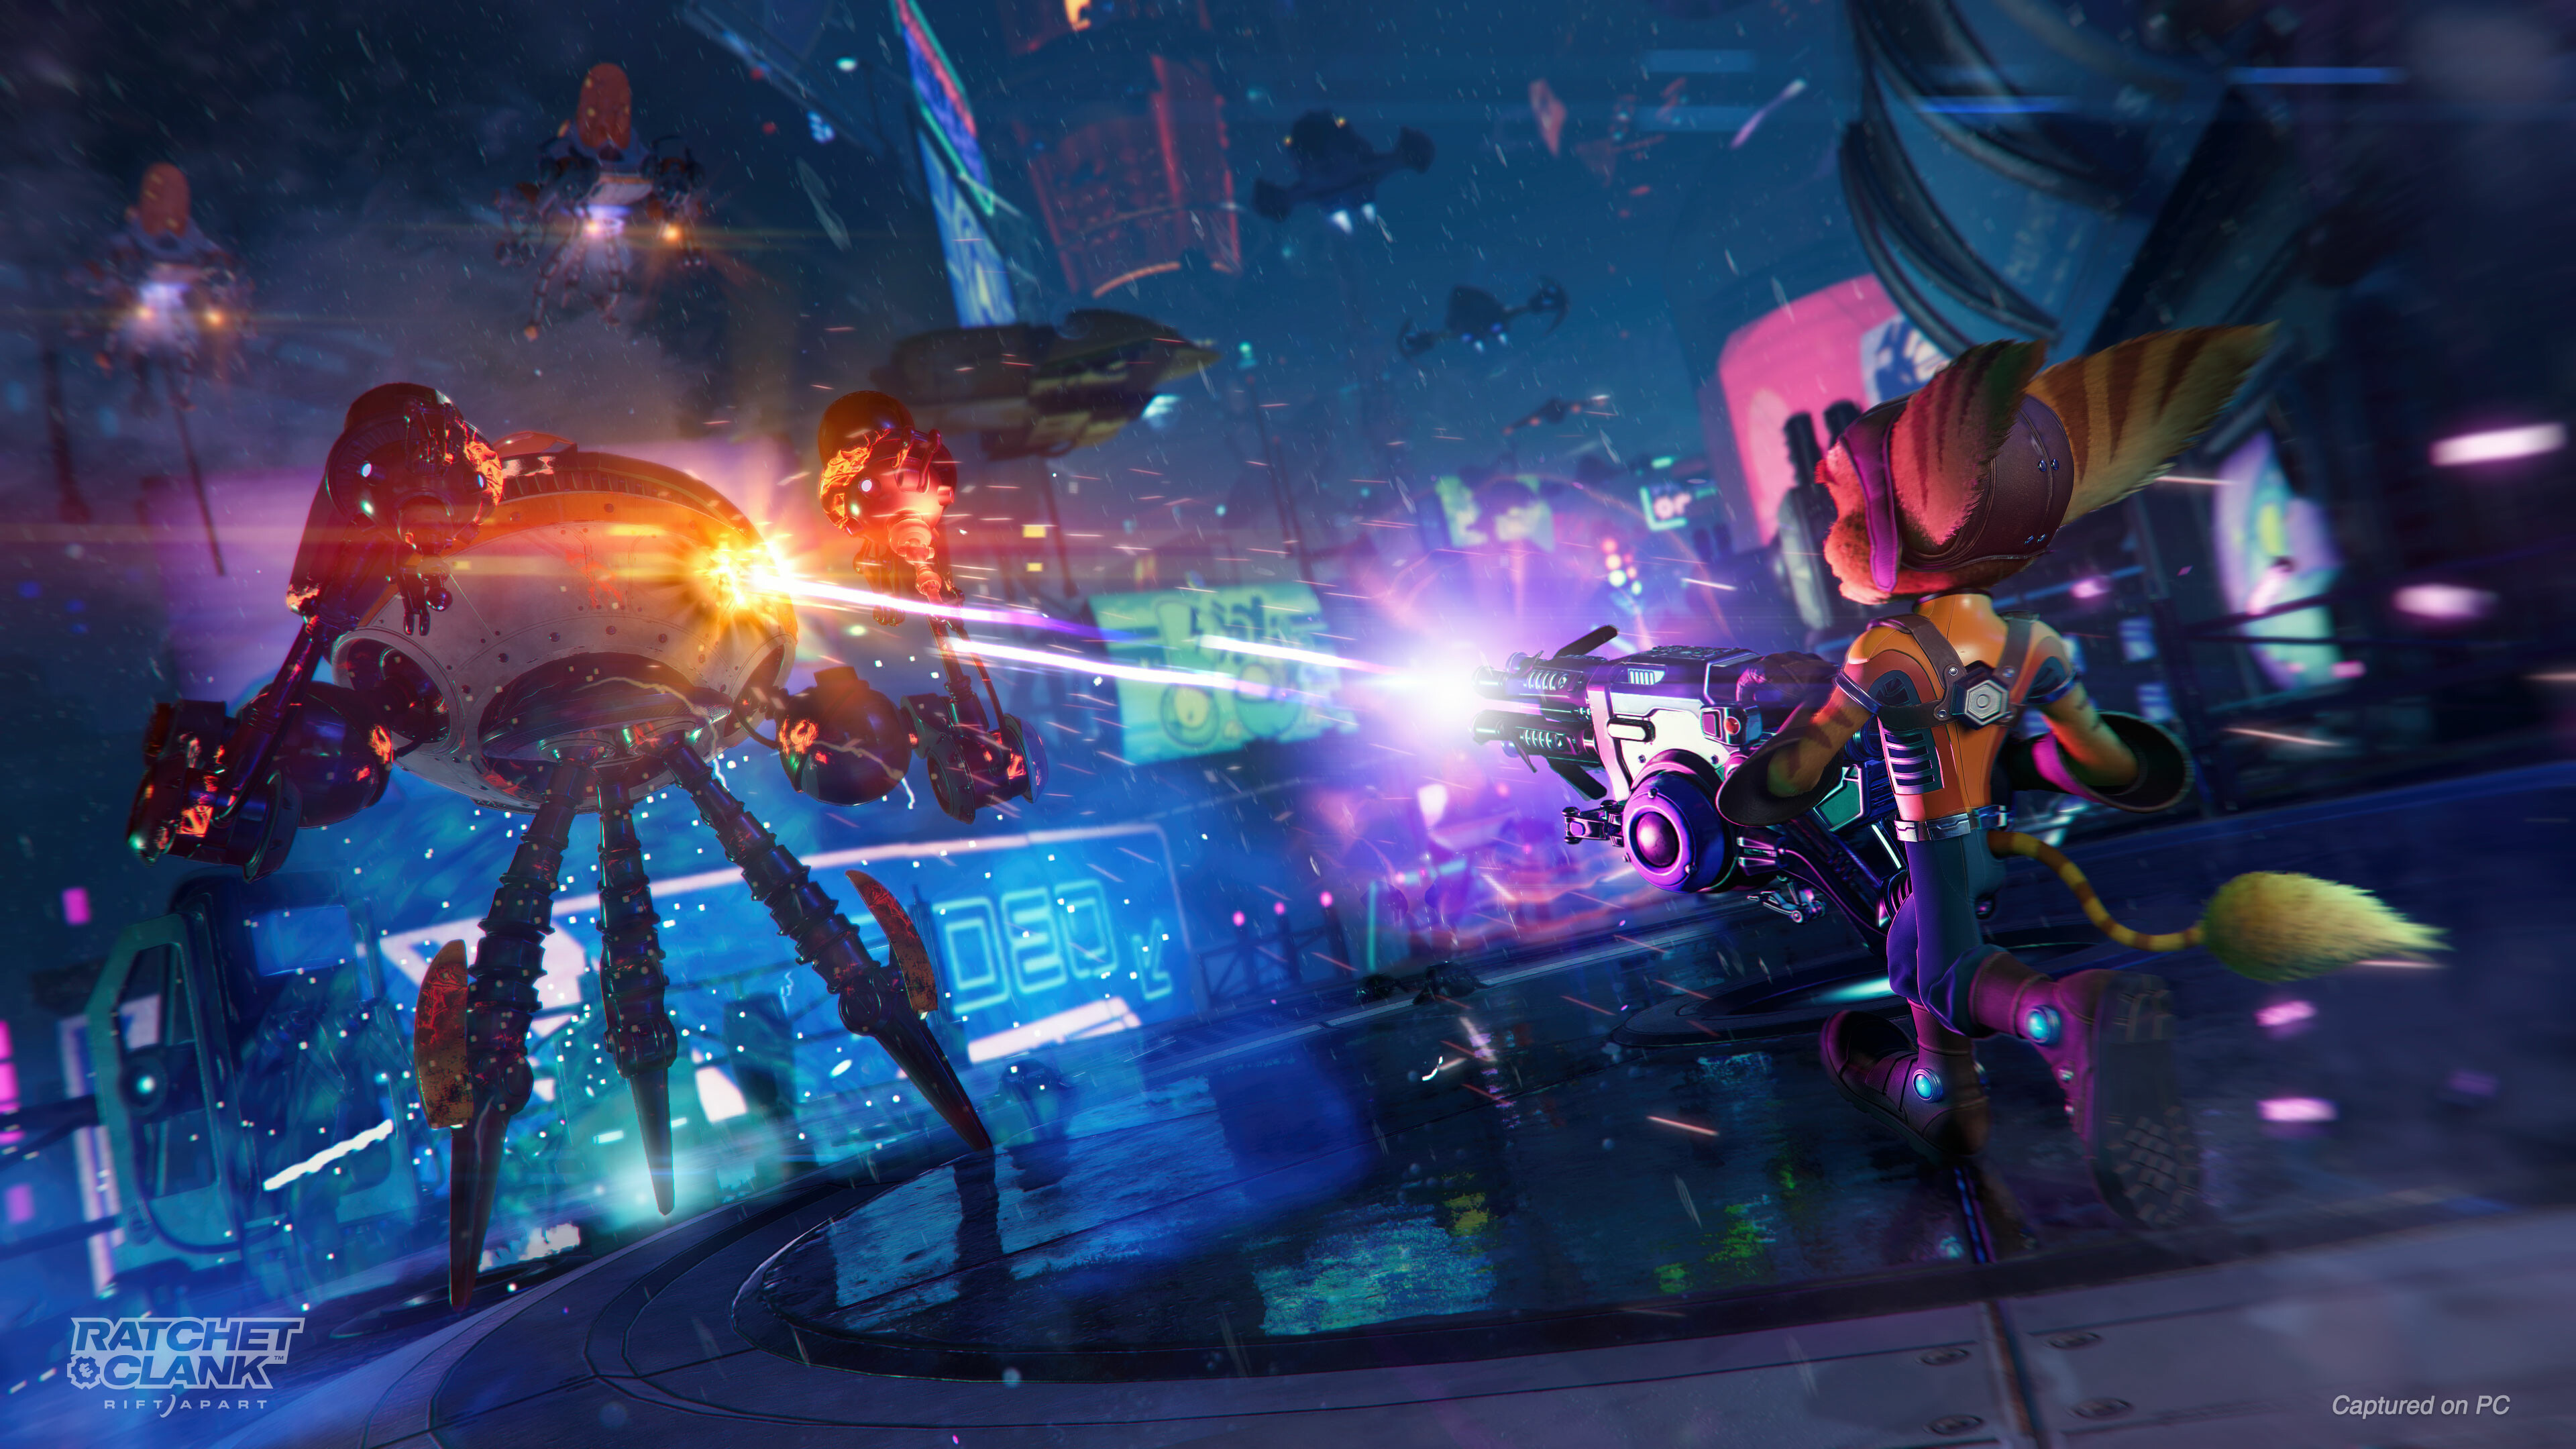 Ratchet & Clank: Rift Apart has a big discount on PC right now